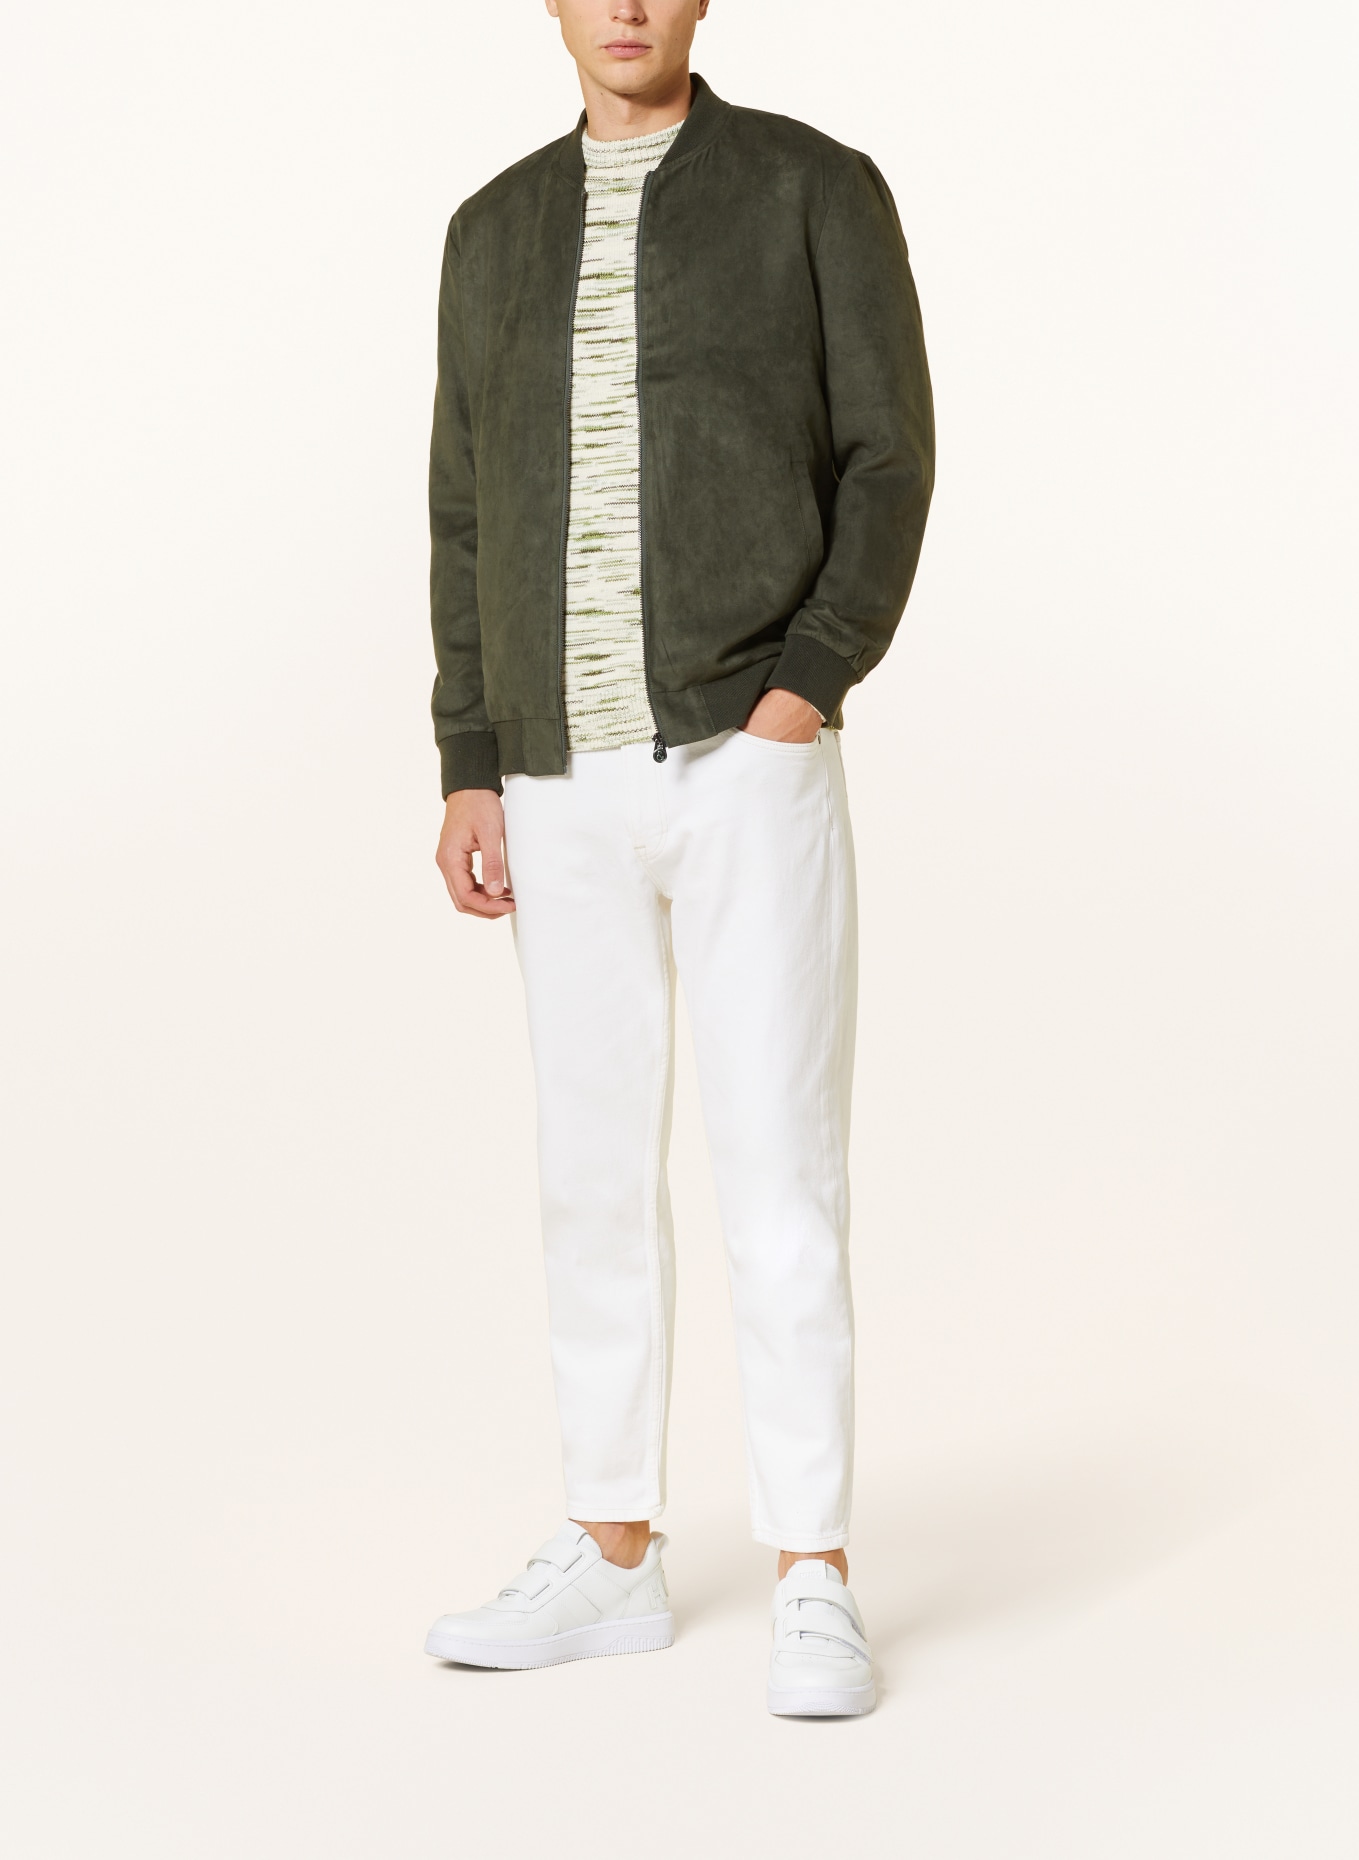 COLOURS & SONS Bomber jacket in leather look, Color: GREEN (Image 2)